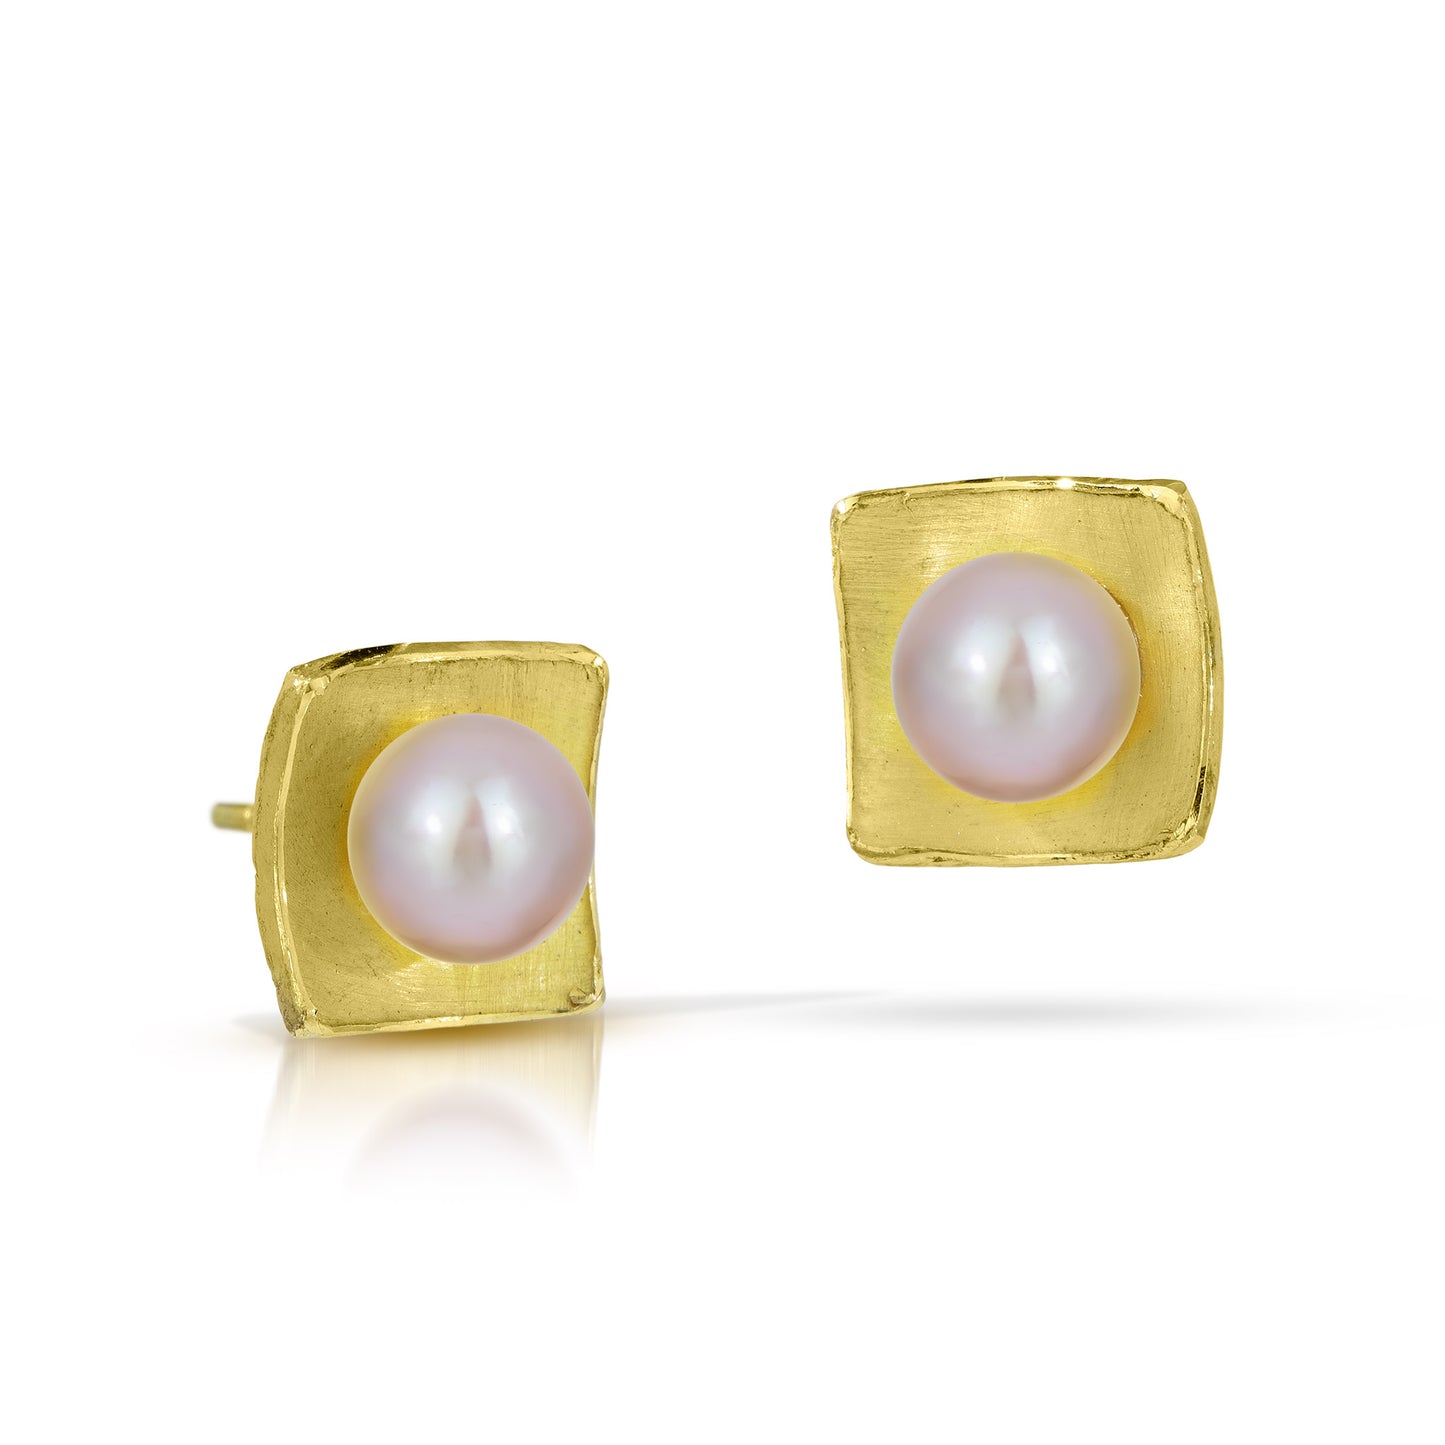 18k Gold Concave Square with Pearl Posts